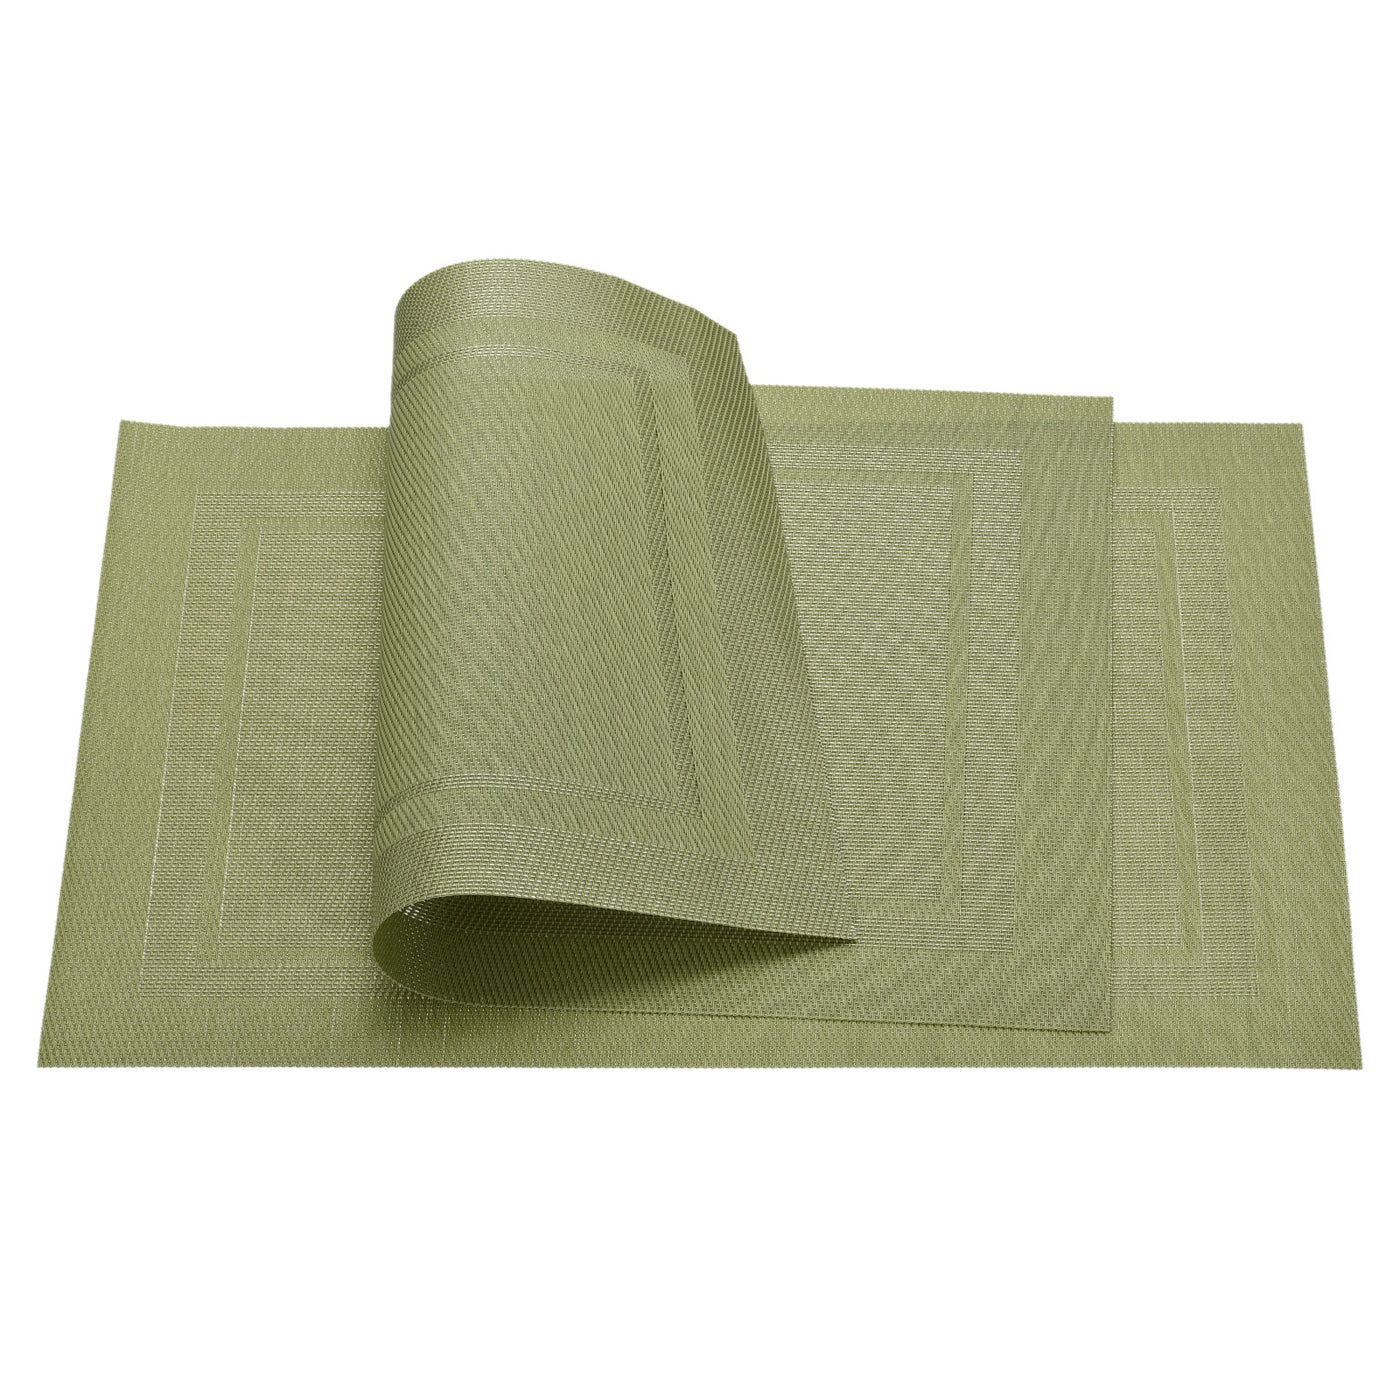 uxcell Uxcell Place Mats 450x300mm 6pcs PVC Table Washable Woven Placemat, Green